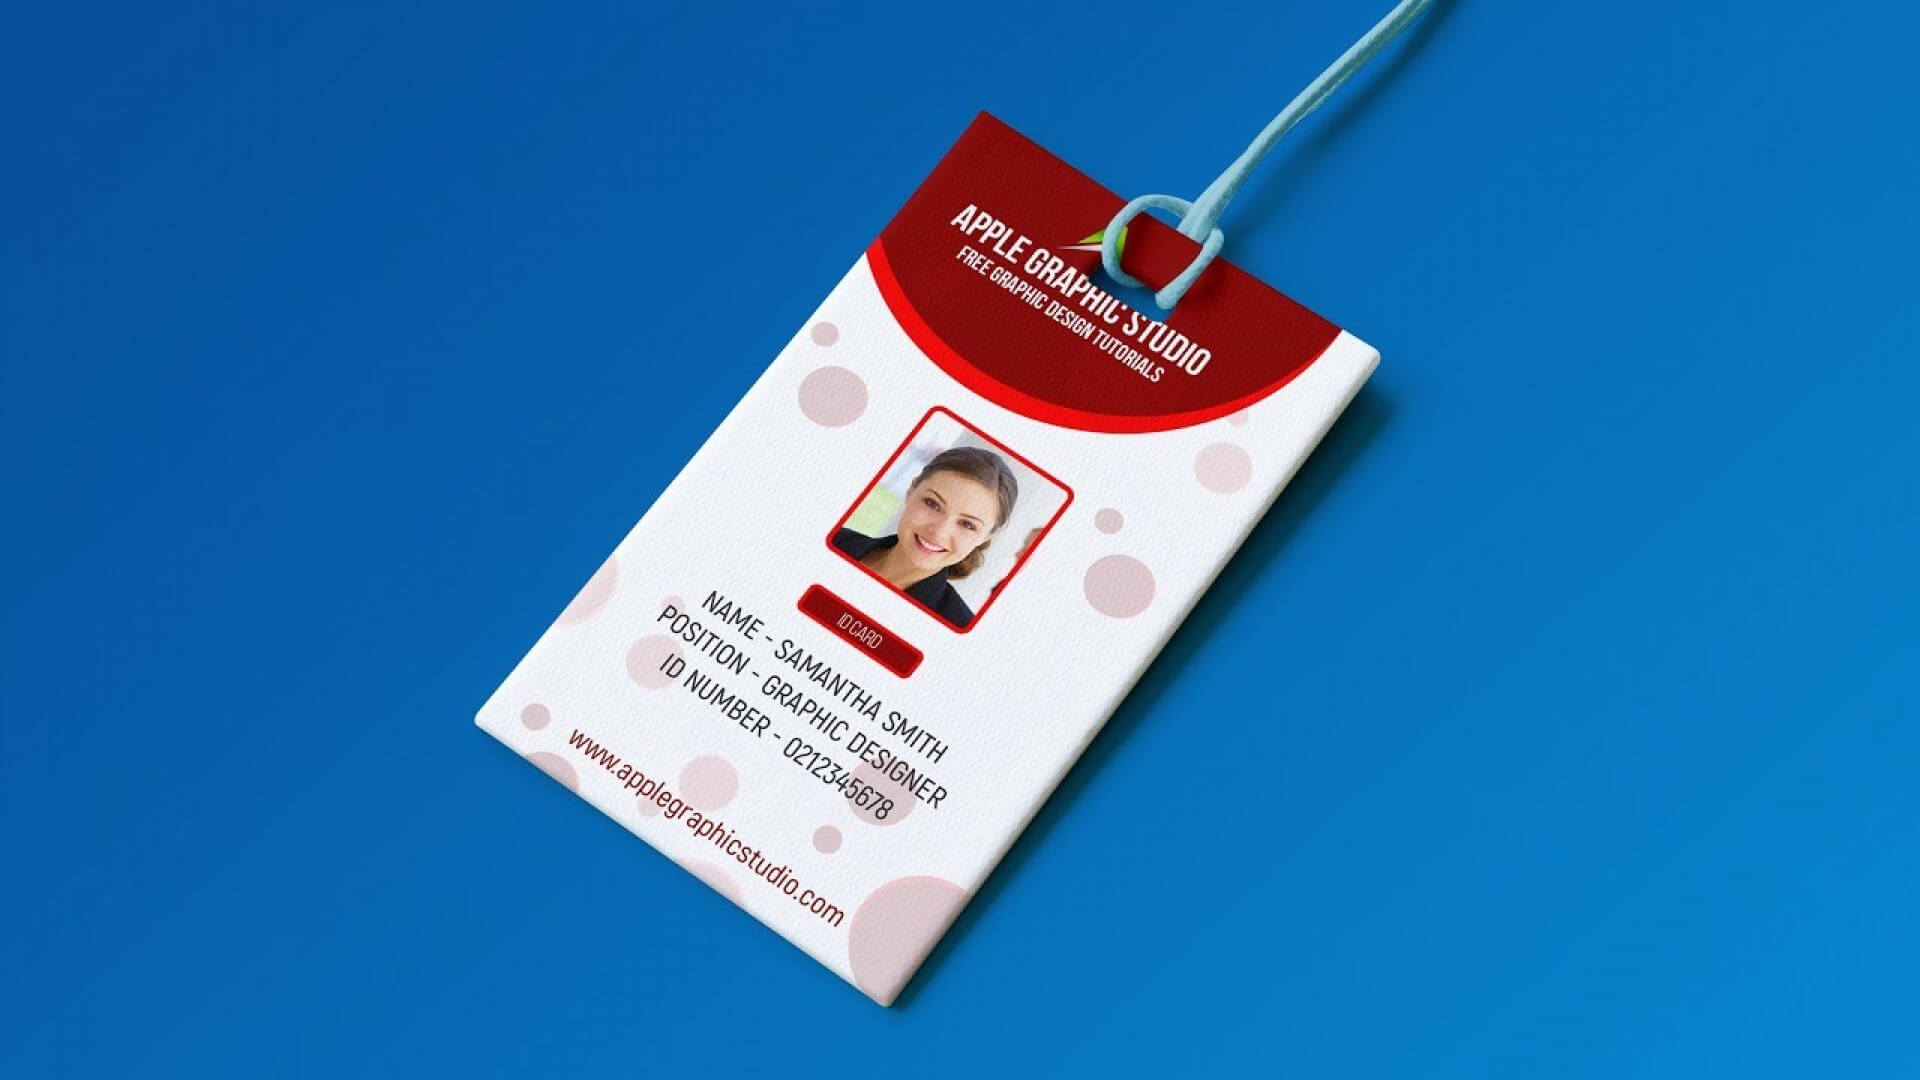 016 Template Ideas Screenshot 21 Id Card Stunning Photoshop With Regard To College Id Card Template Psd